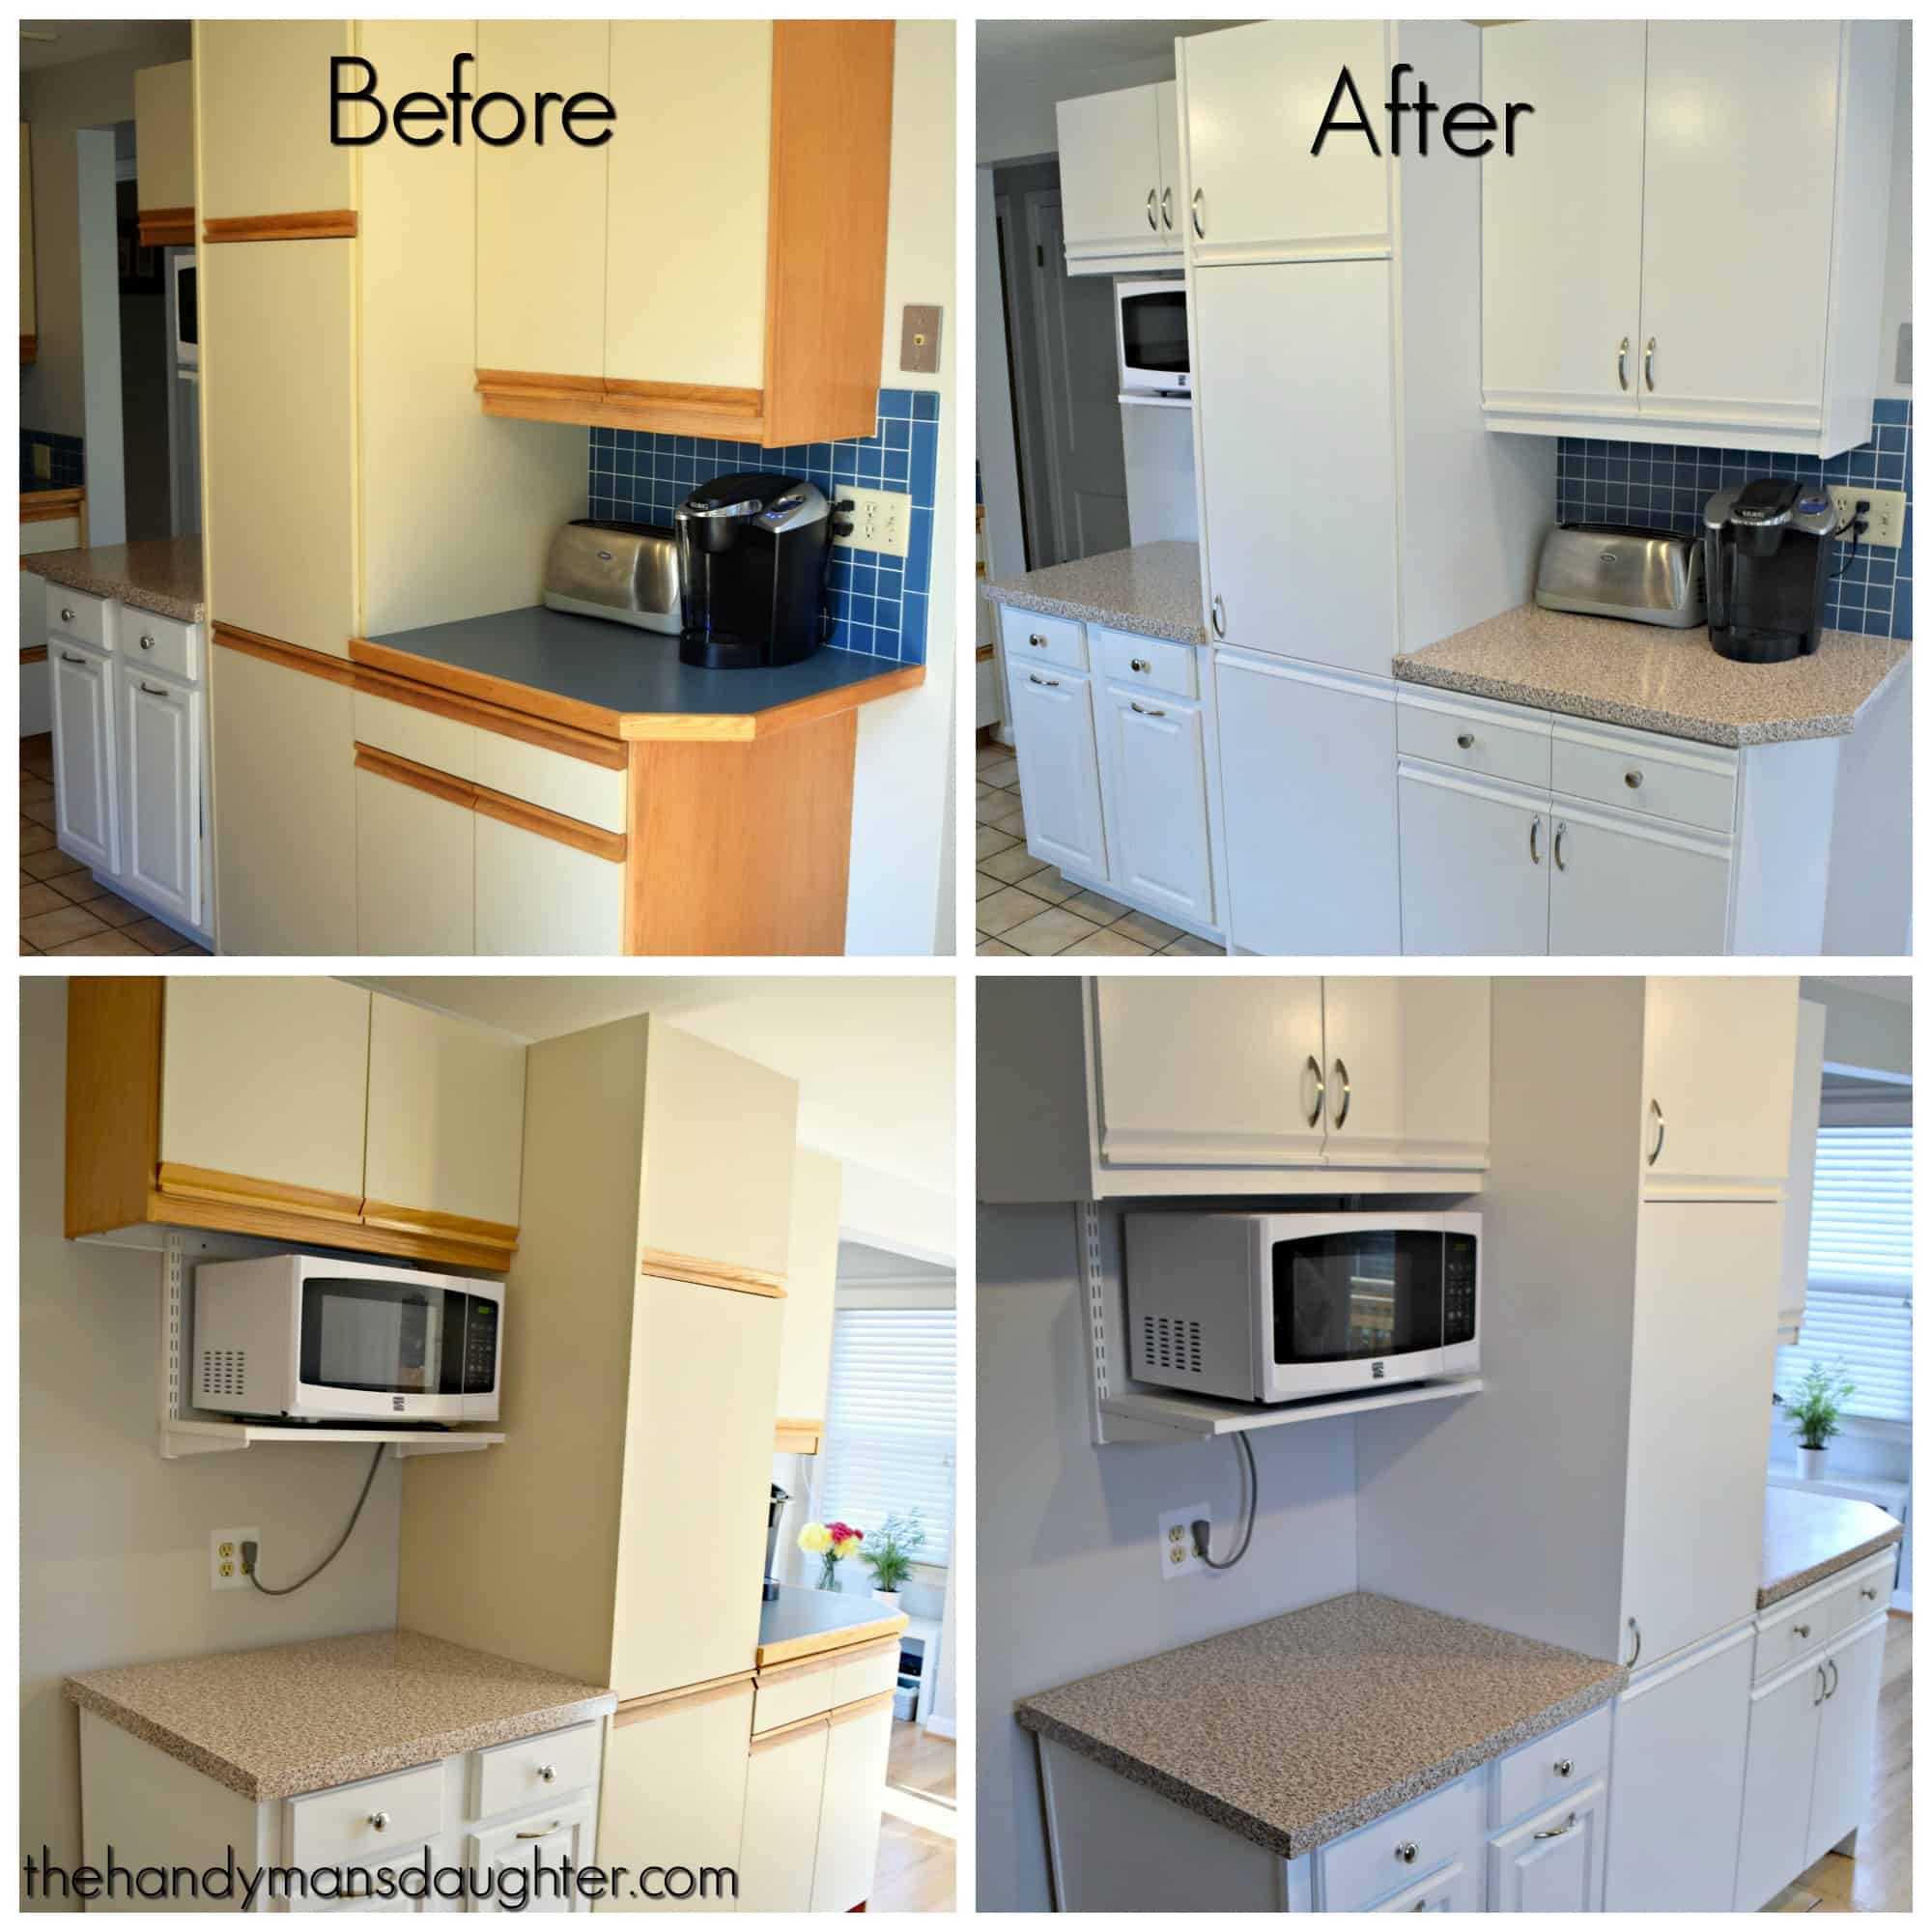 Tips For Updating Melamine Cabinets, Painting Mdf Kitchen Cupboards